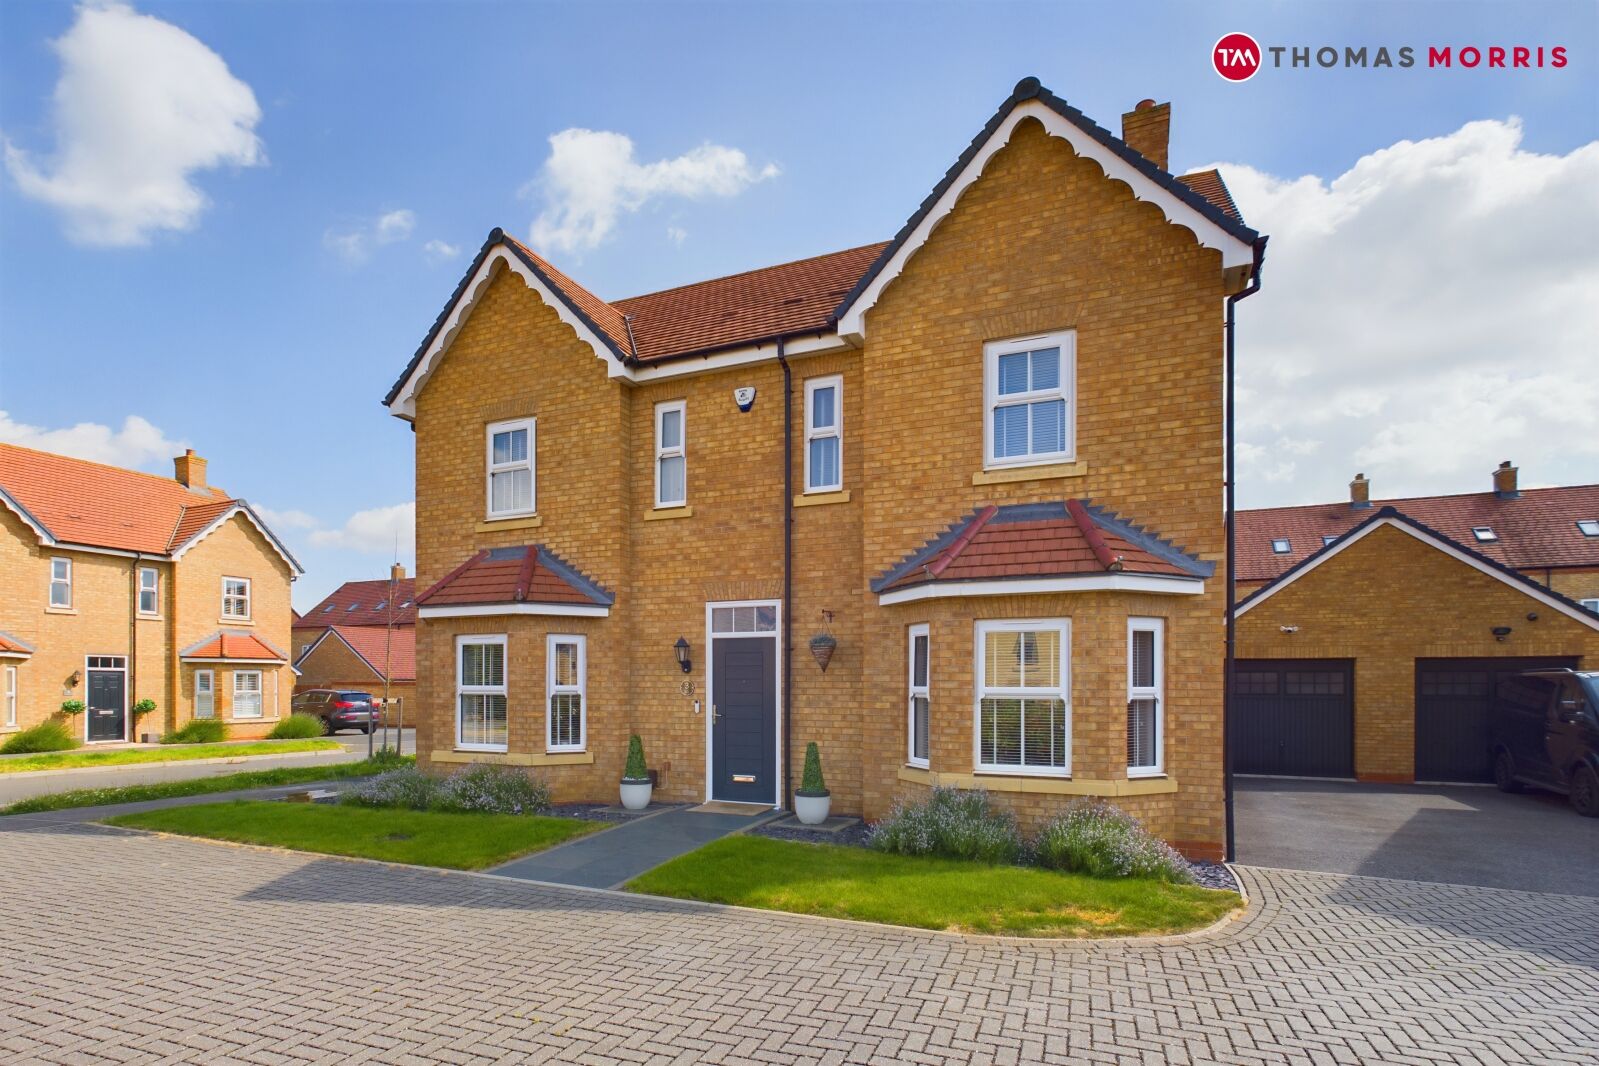 4 bedroom detached house for sale Gale Drive, Biggleswade, SG18, main image